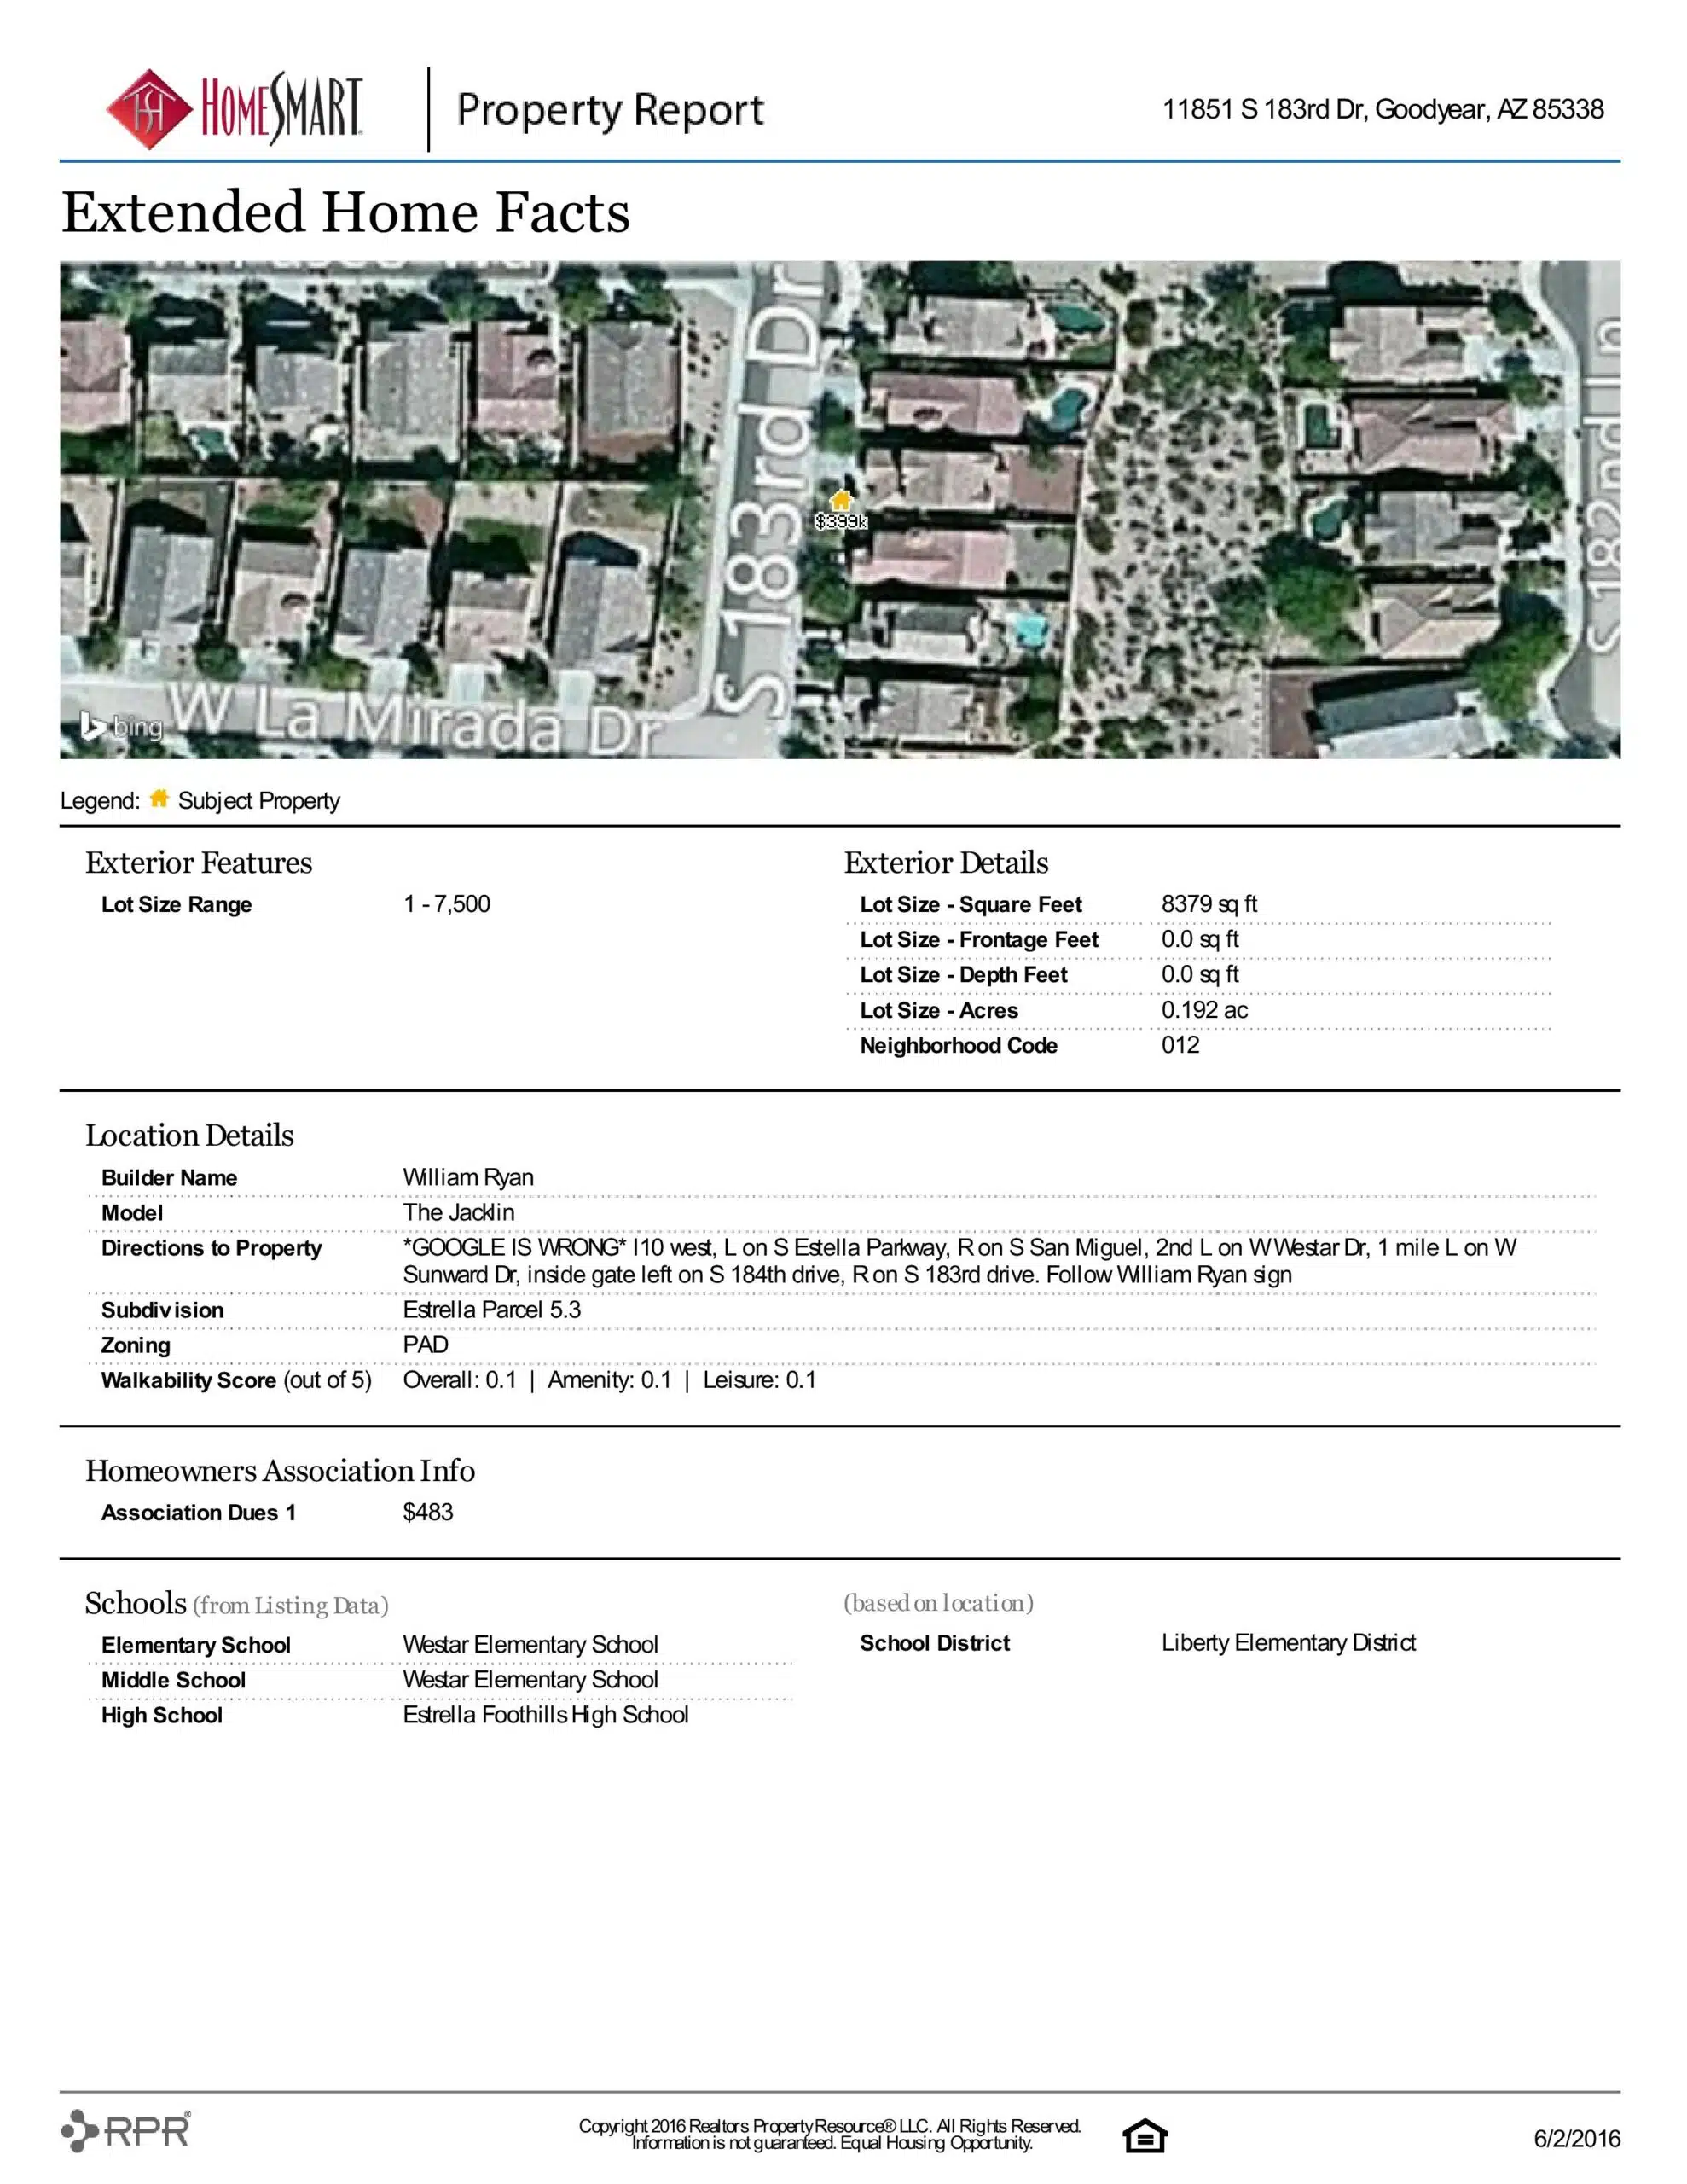 11851 S 183RD DR PROPERTY REPORT-page-004